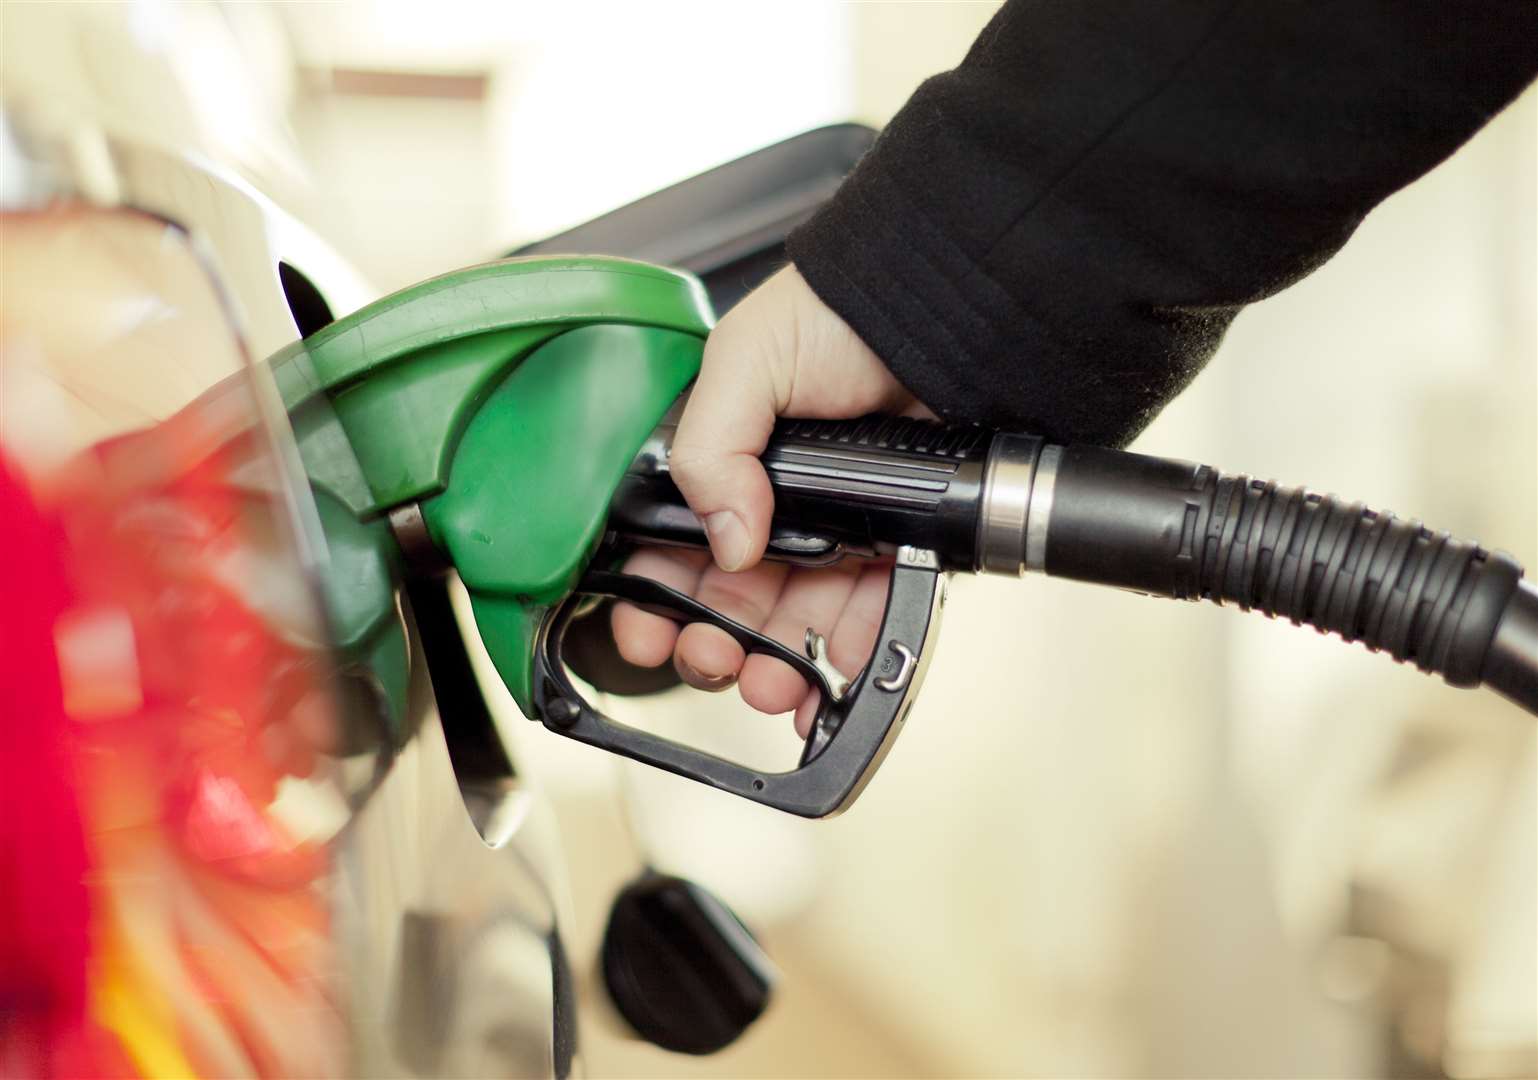 Gas pumps have shut at a Lenham service station due to an industry-wide shortage of drivers Pic: Getty Images, Gremlin